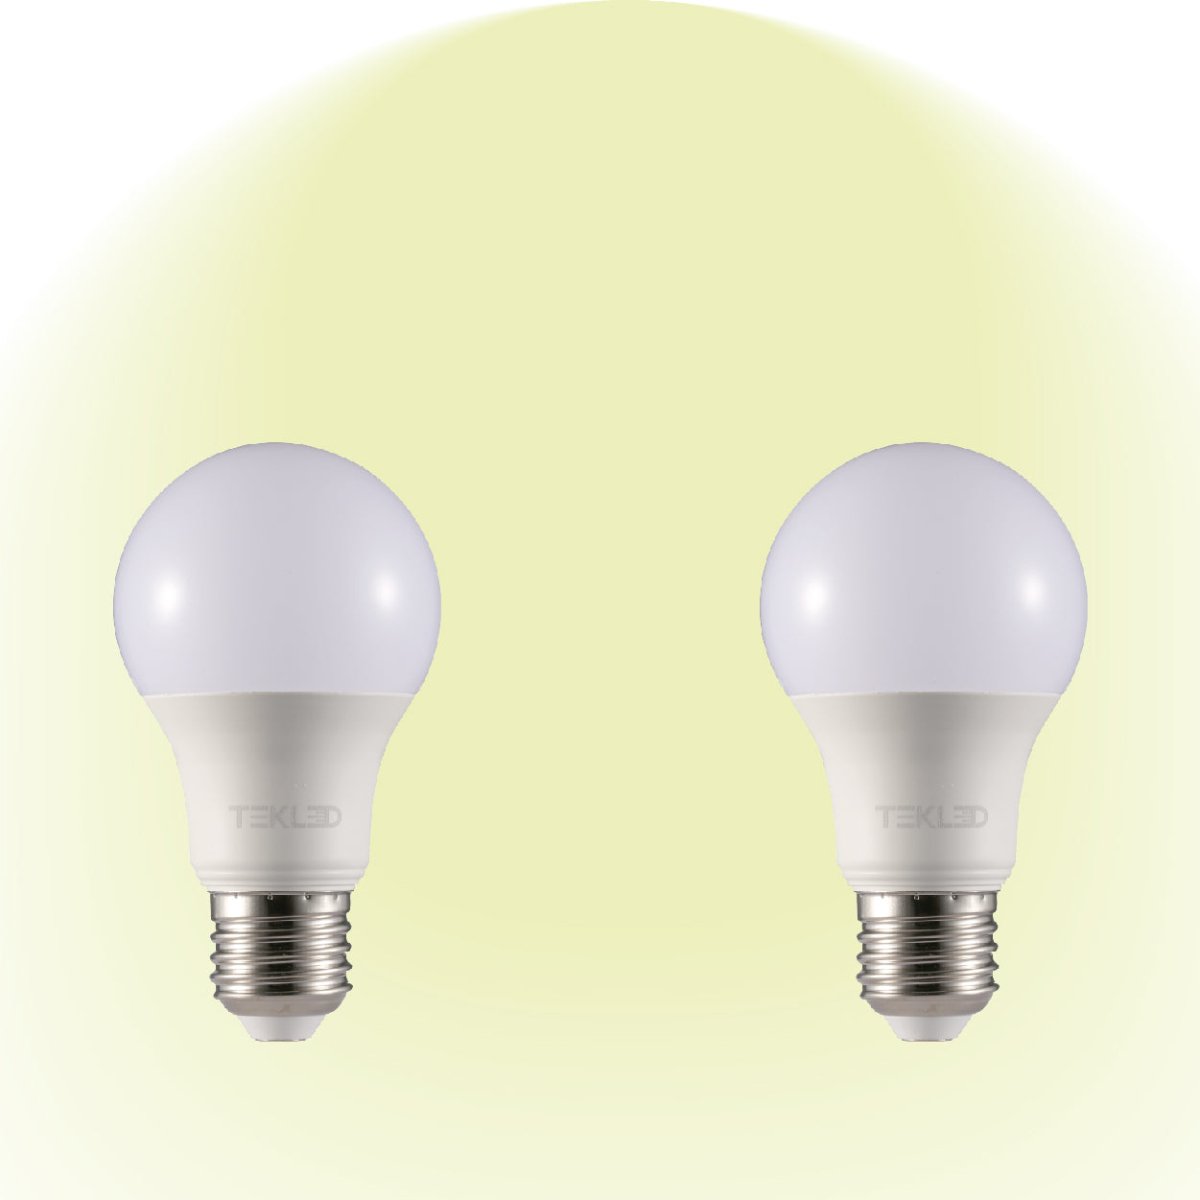 Virgo LED GLS Bulb A60 Dimmable E27 Edison Screw 4000K Cool White 12 W Pack of 2 527-15634